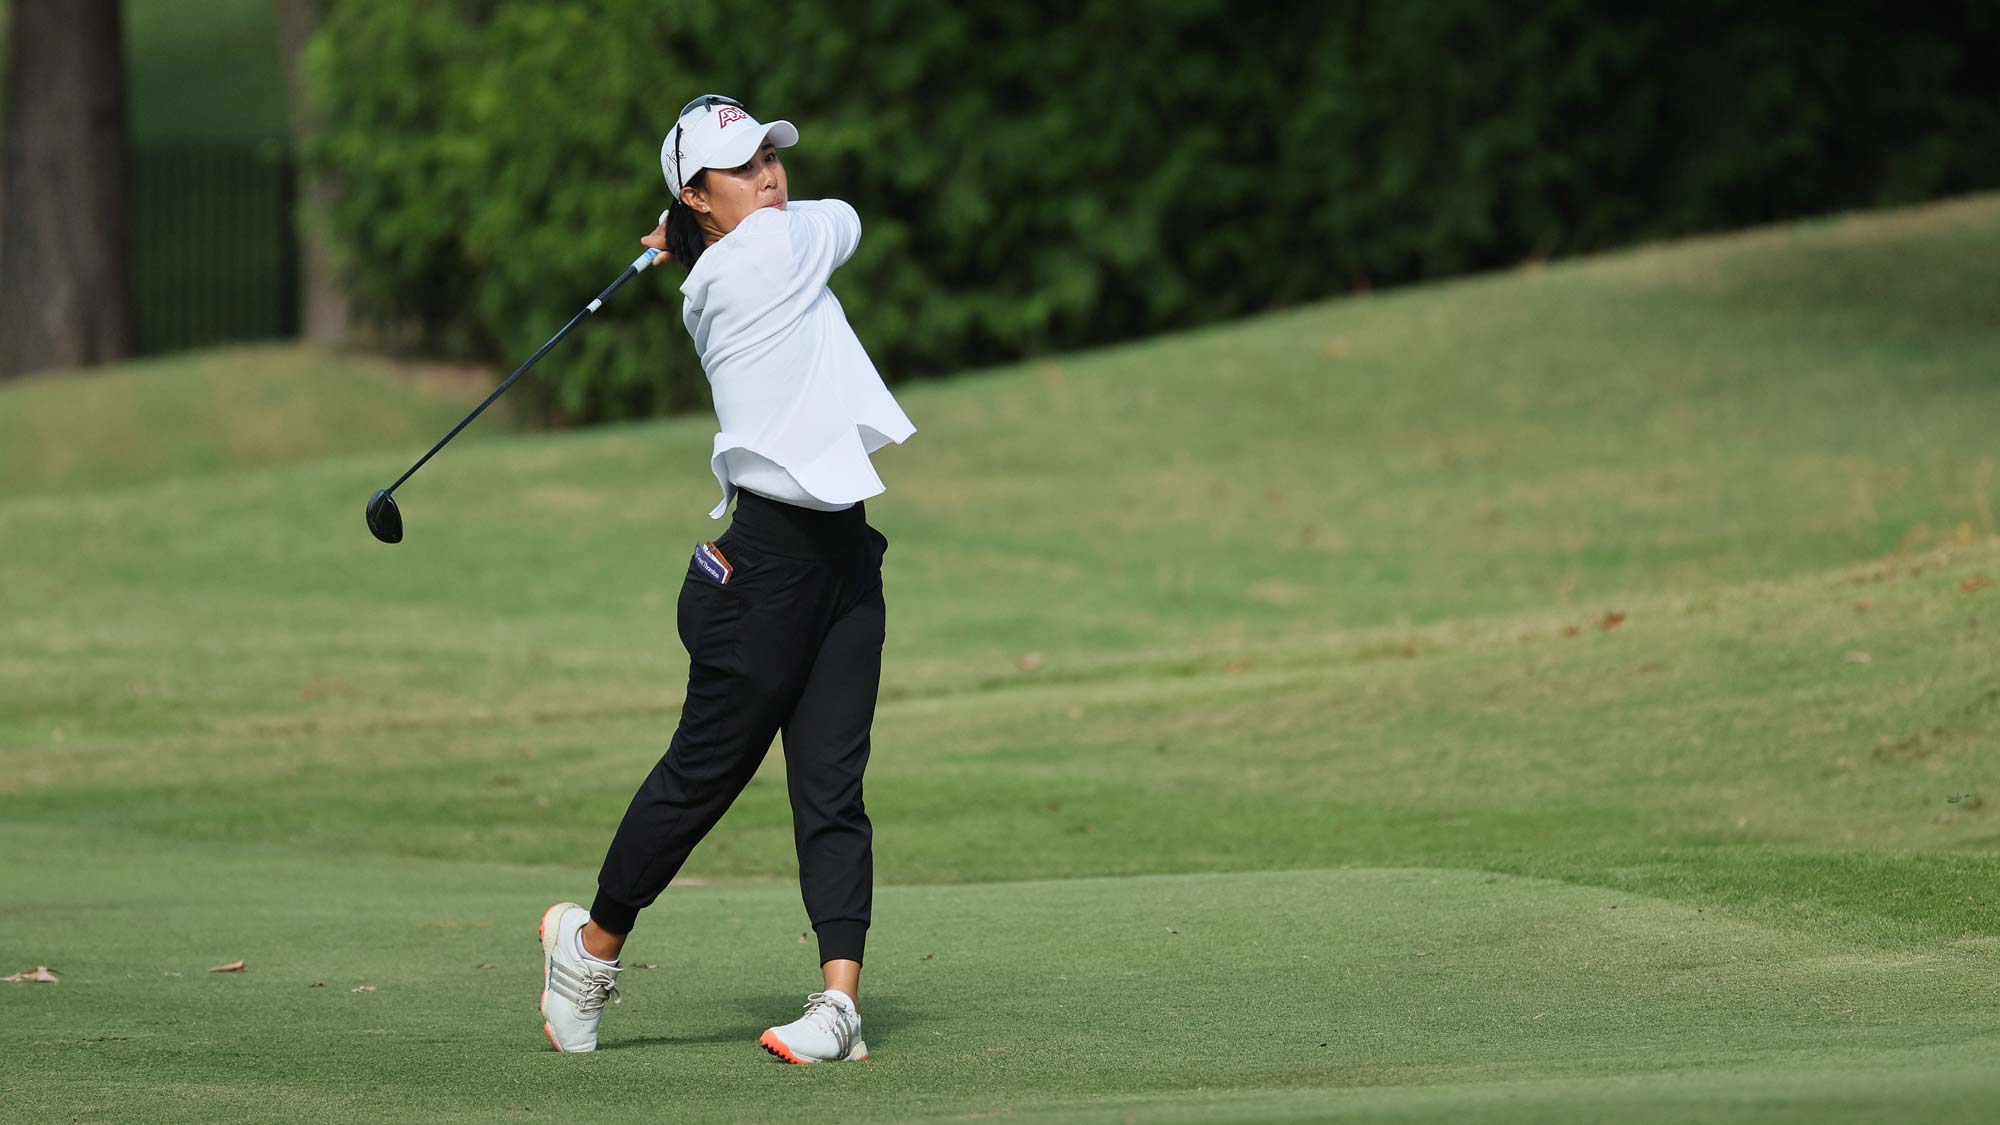 Danielle Kang hits her second shot on the 7th hole during the second round of the Walmart NW Arkansas Championship Presented by P&G